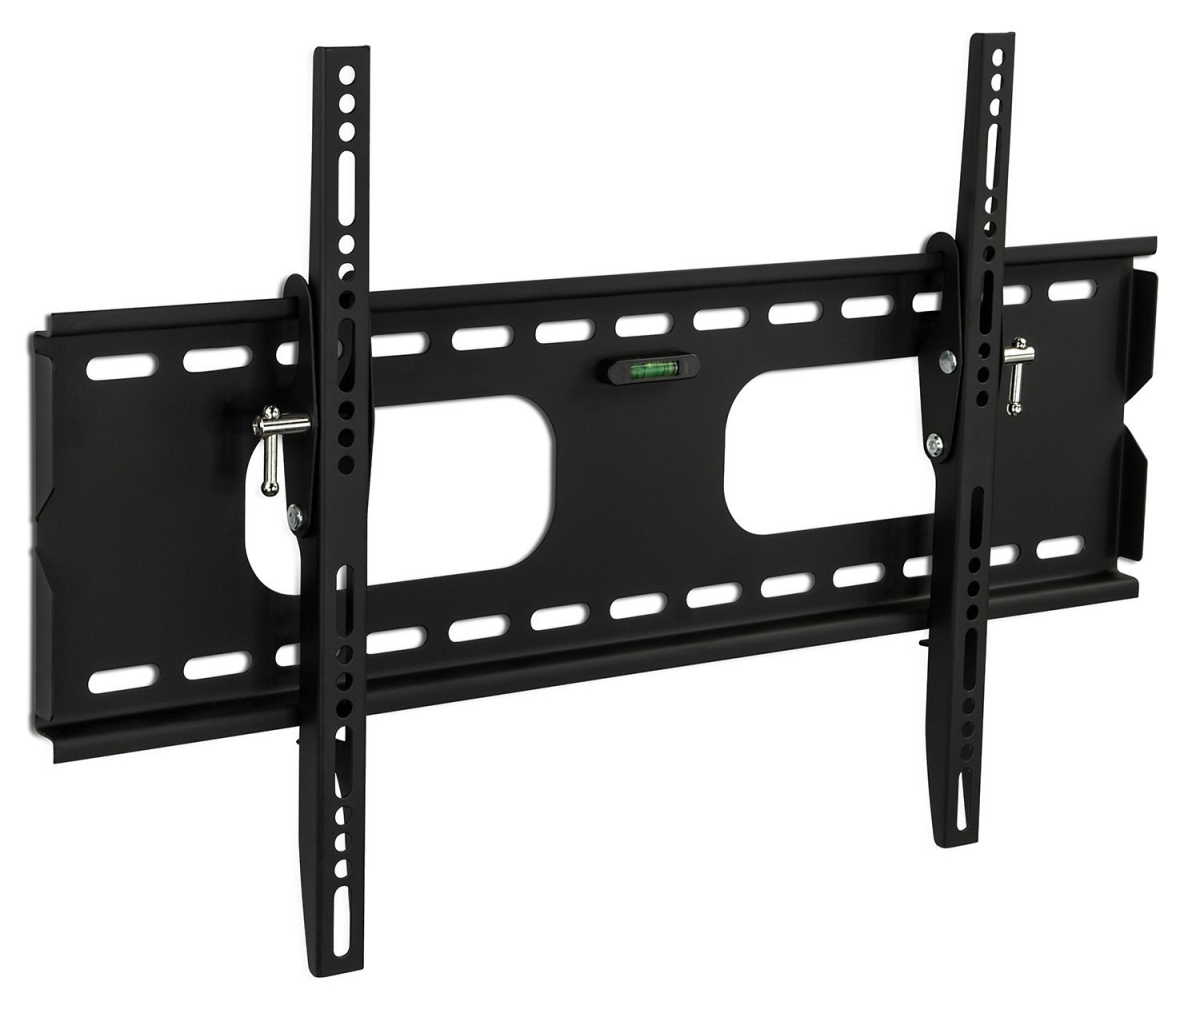 32-60 in. Low-Profile Tilting TV Wall Mount Bracket for LCD LED OLED 4K or Plasma Flat Screen TVs -  BetterBattery, BE2618590